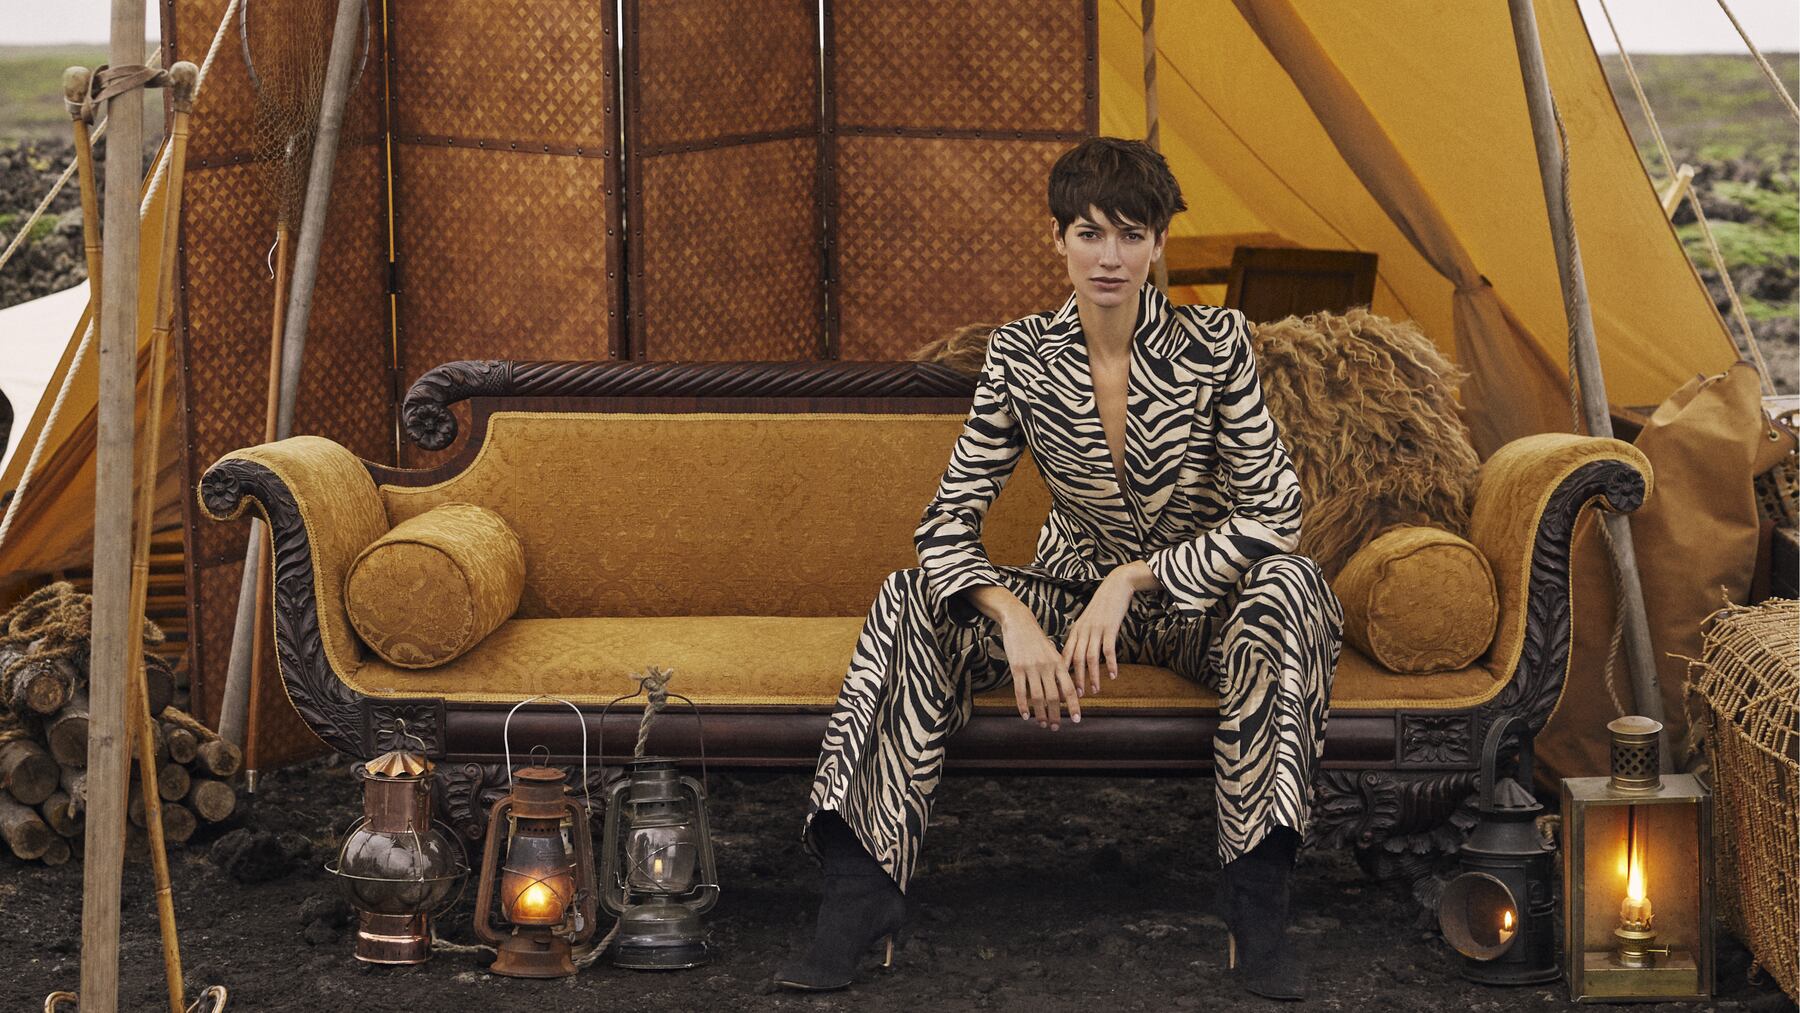 Woman in a zebra suit sitting on a yellow couch in yellow tent.